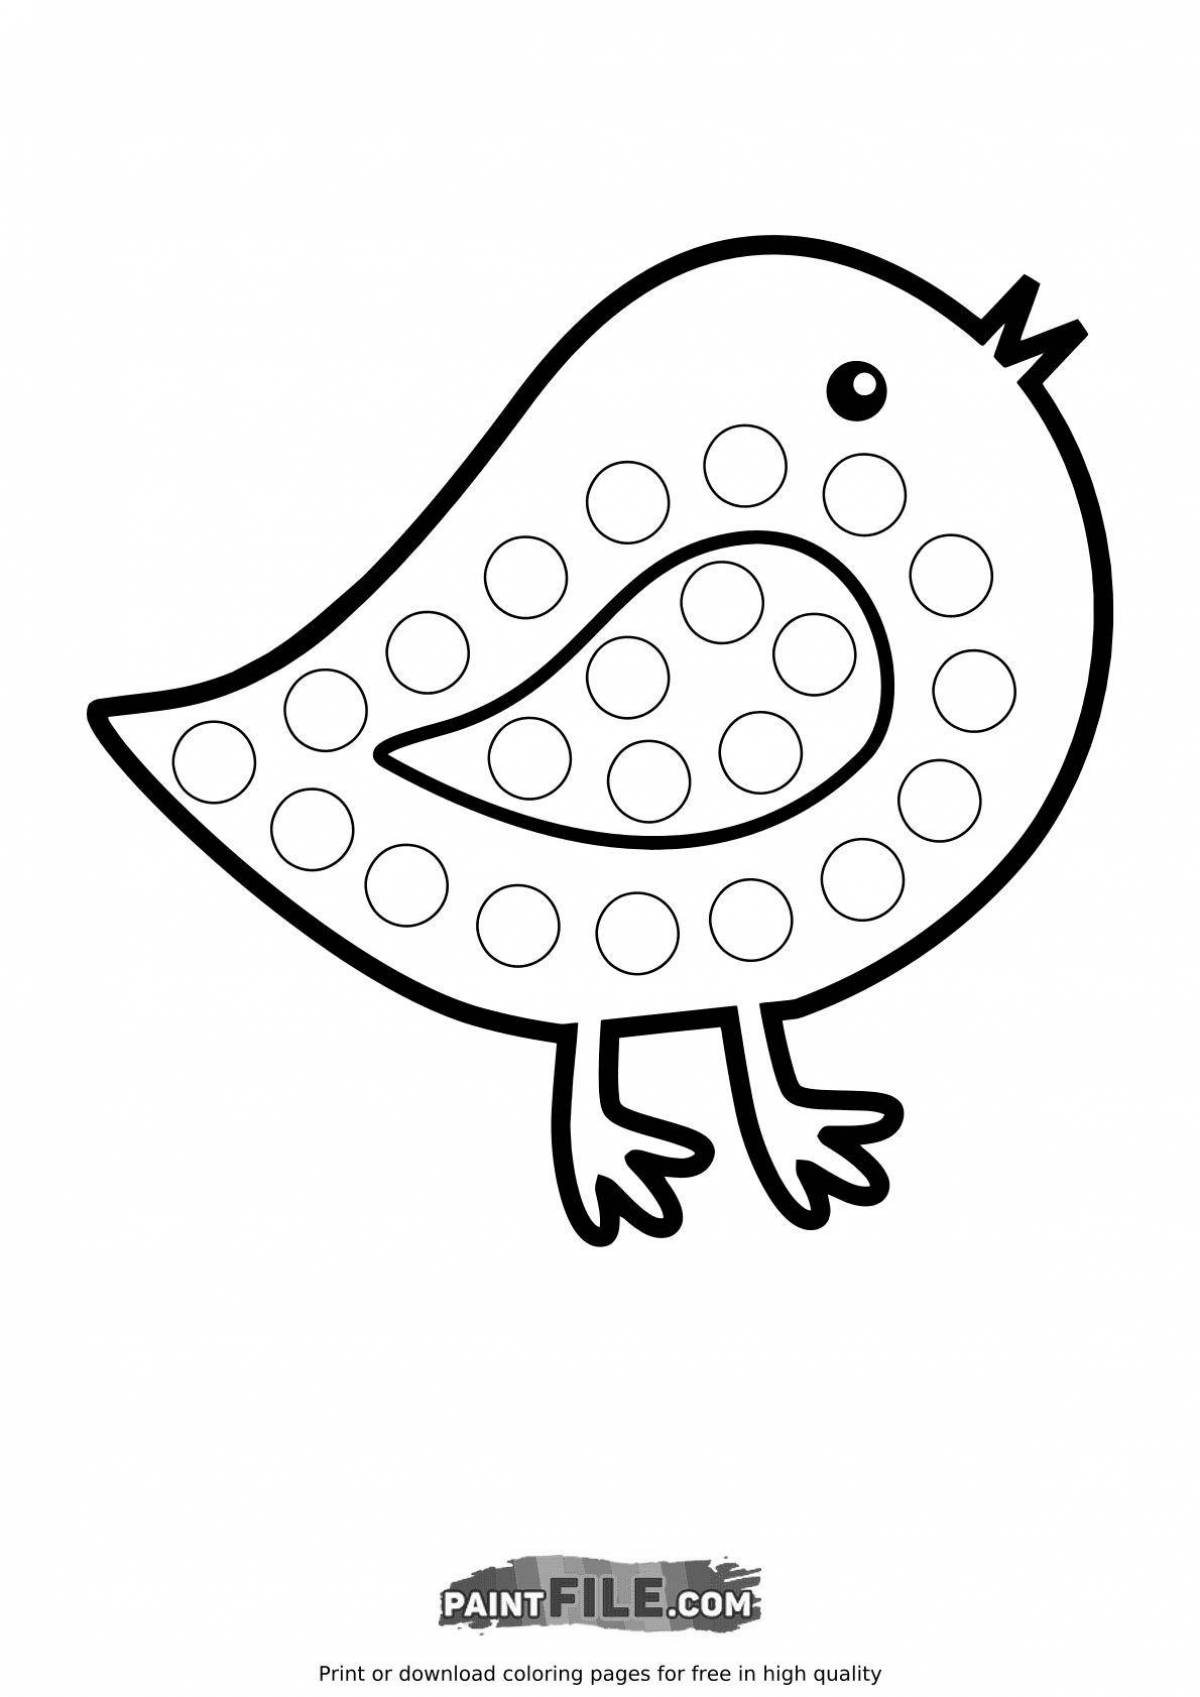 Adorable toddler finger coloring page